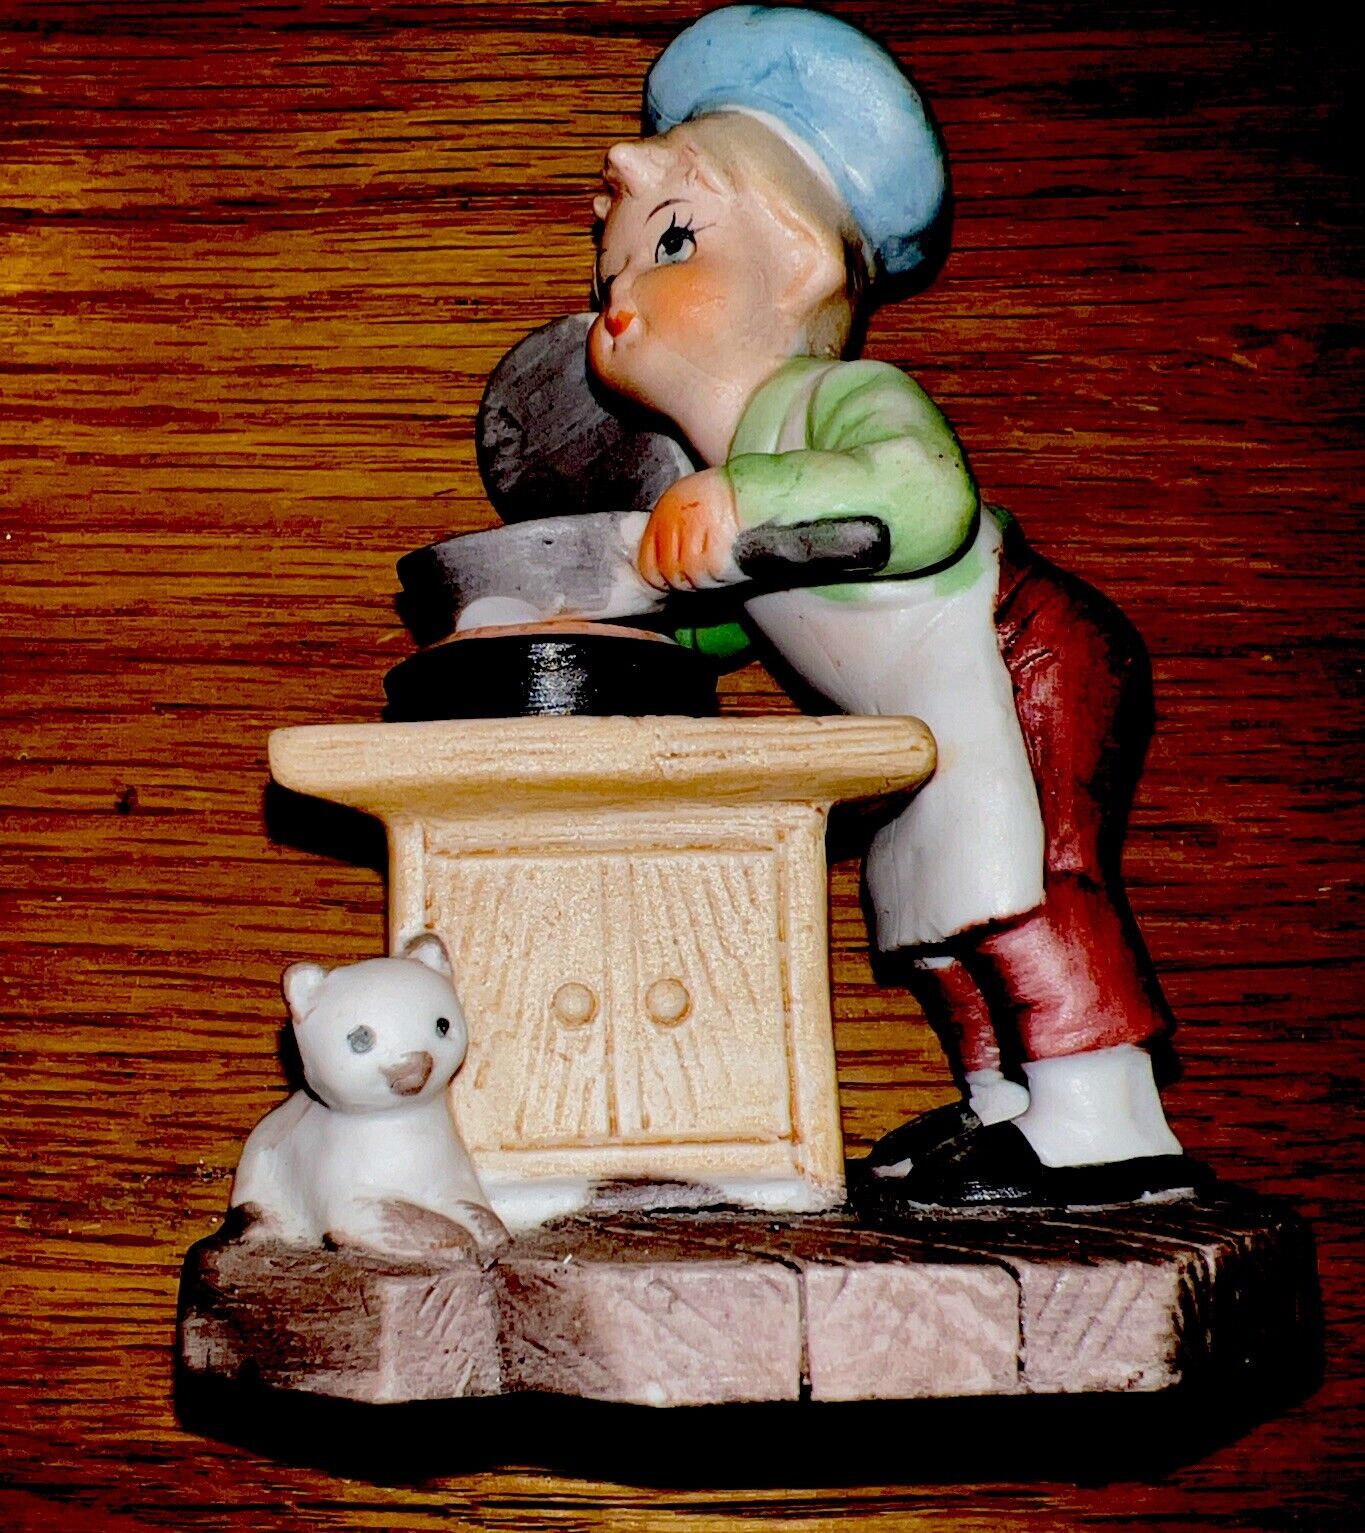 CeramicLITTLE BOY CHEF figurine,made inTaiwan by NANCO-Boy Opens PanLid onStove